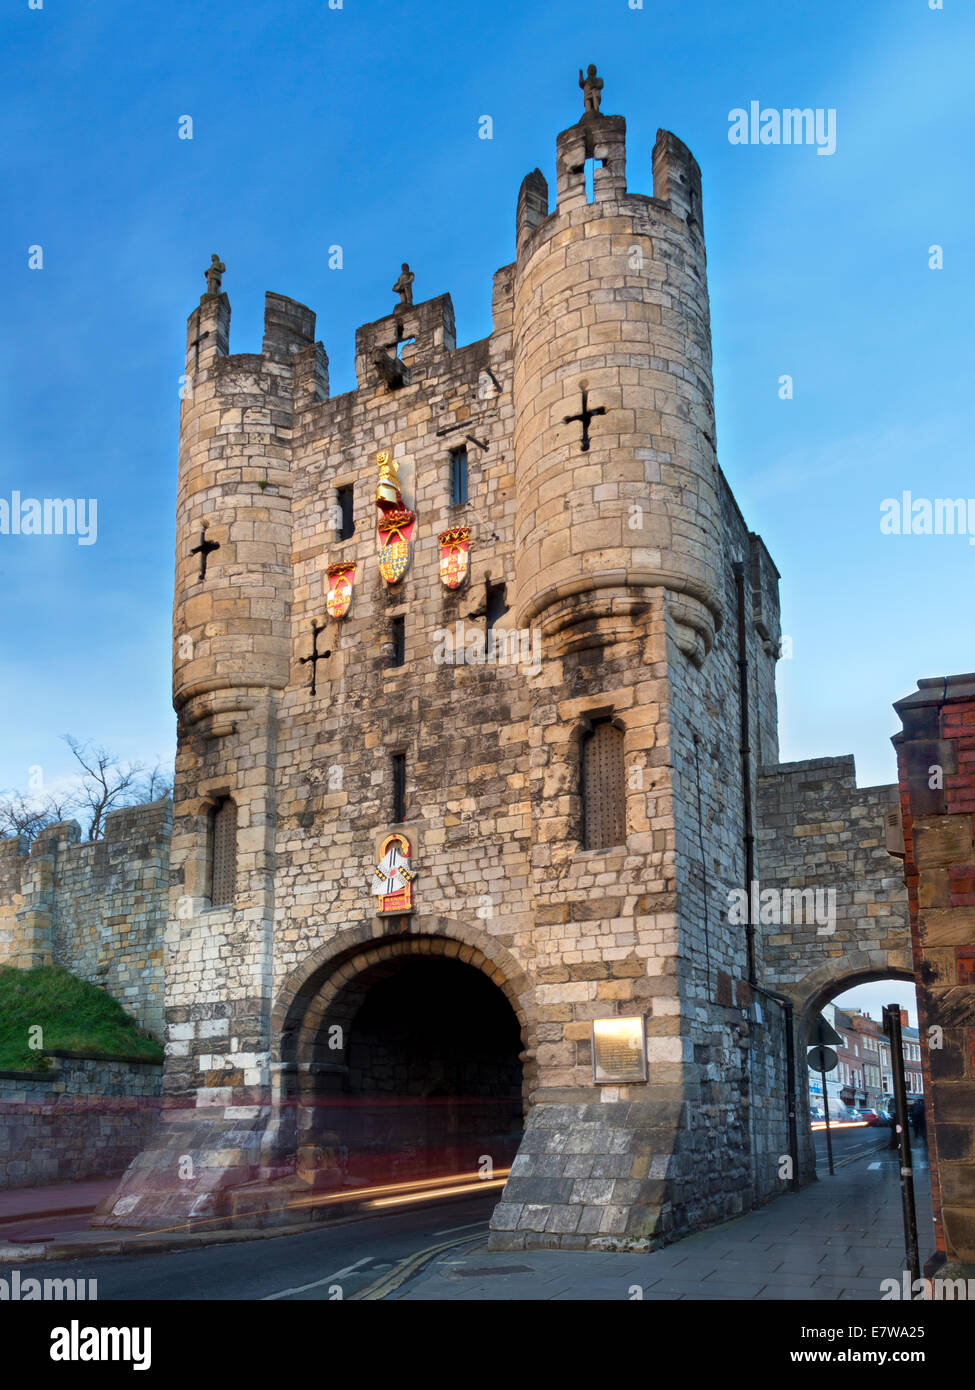 Micklegate Bar and traffic light trails at dusk, in York, North Yorkshire, England. Stock Photo